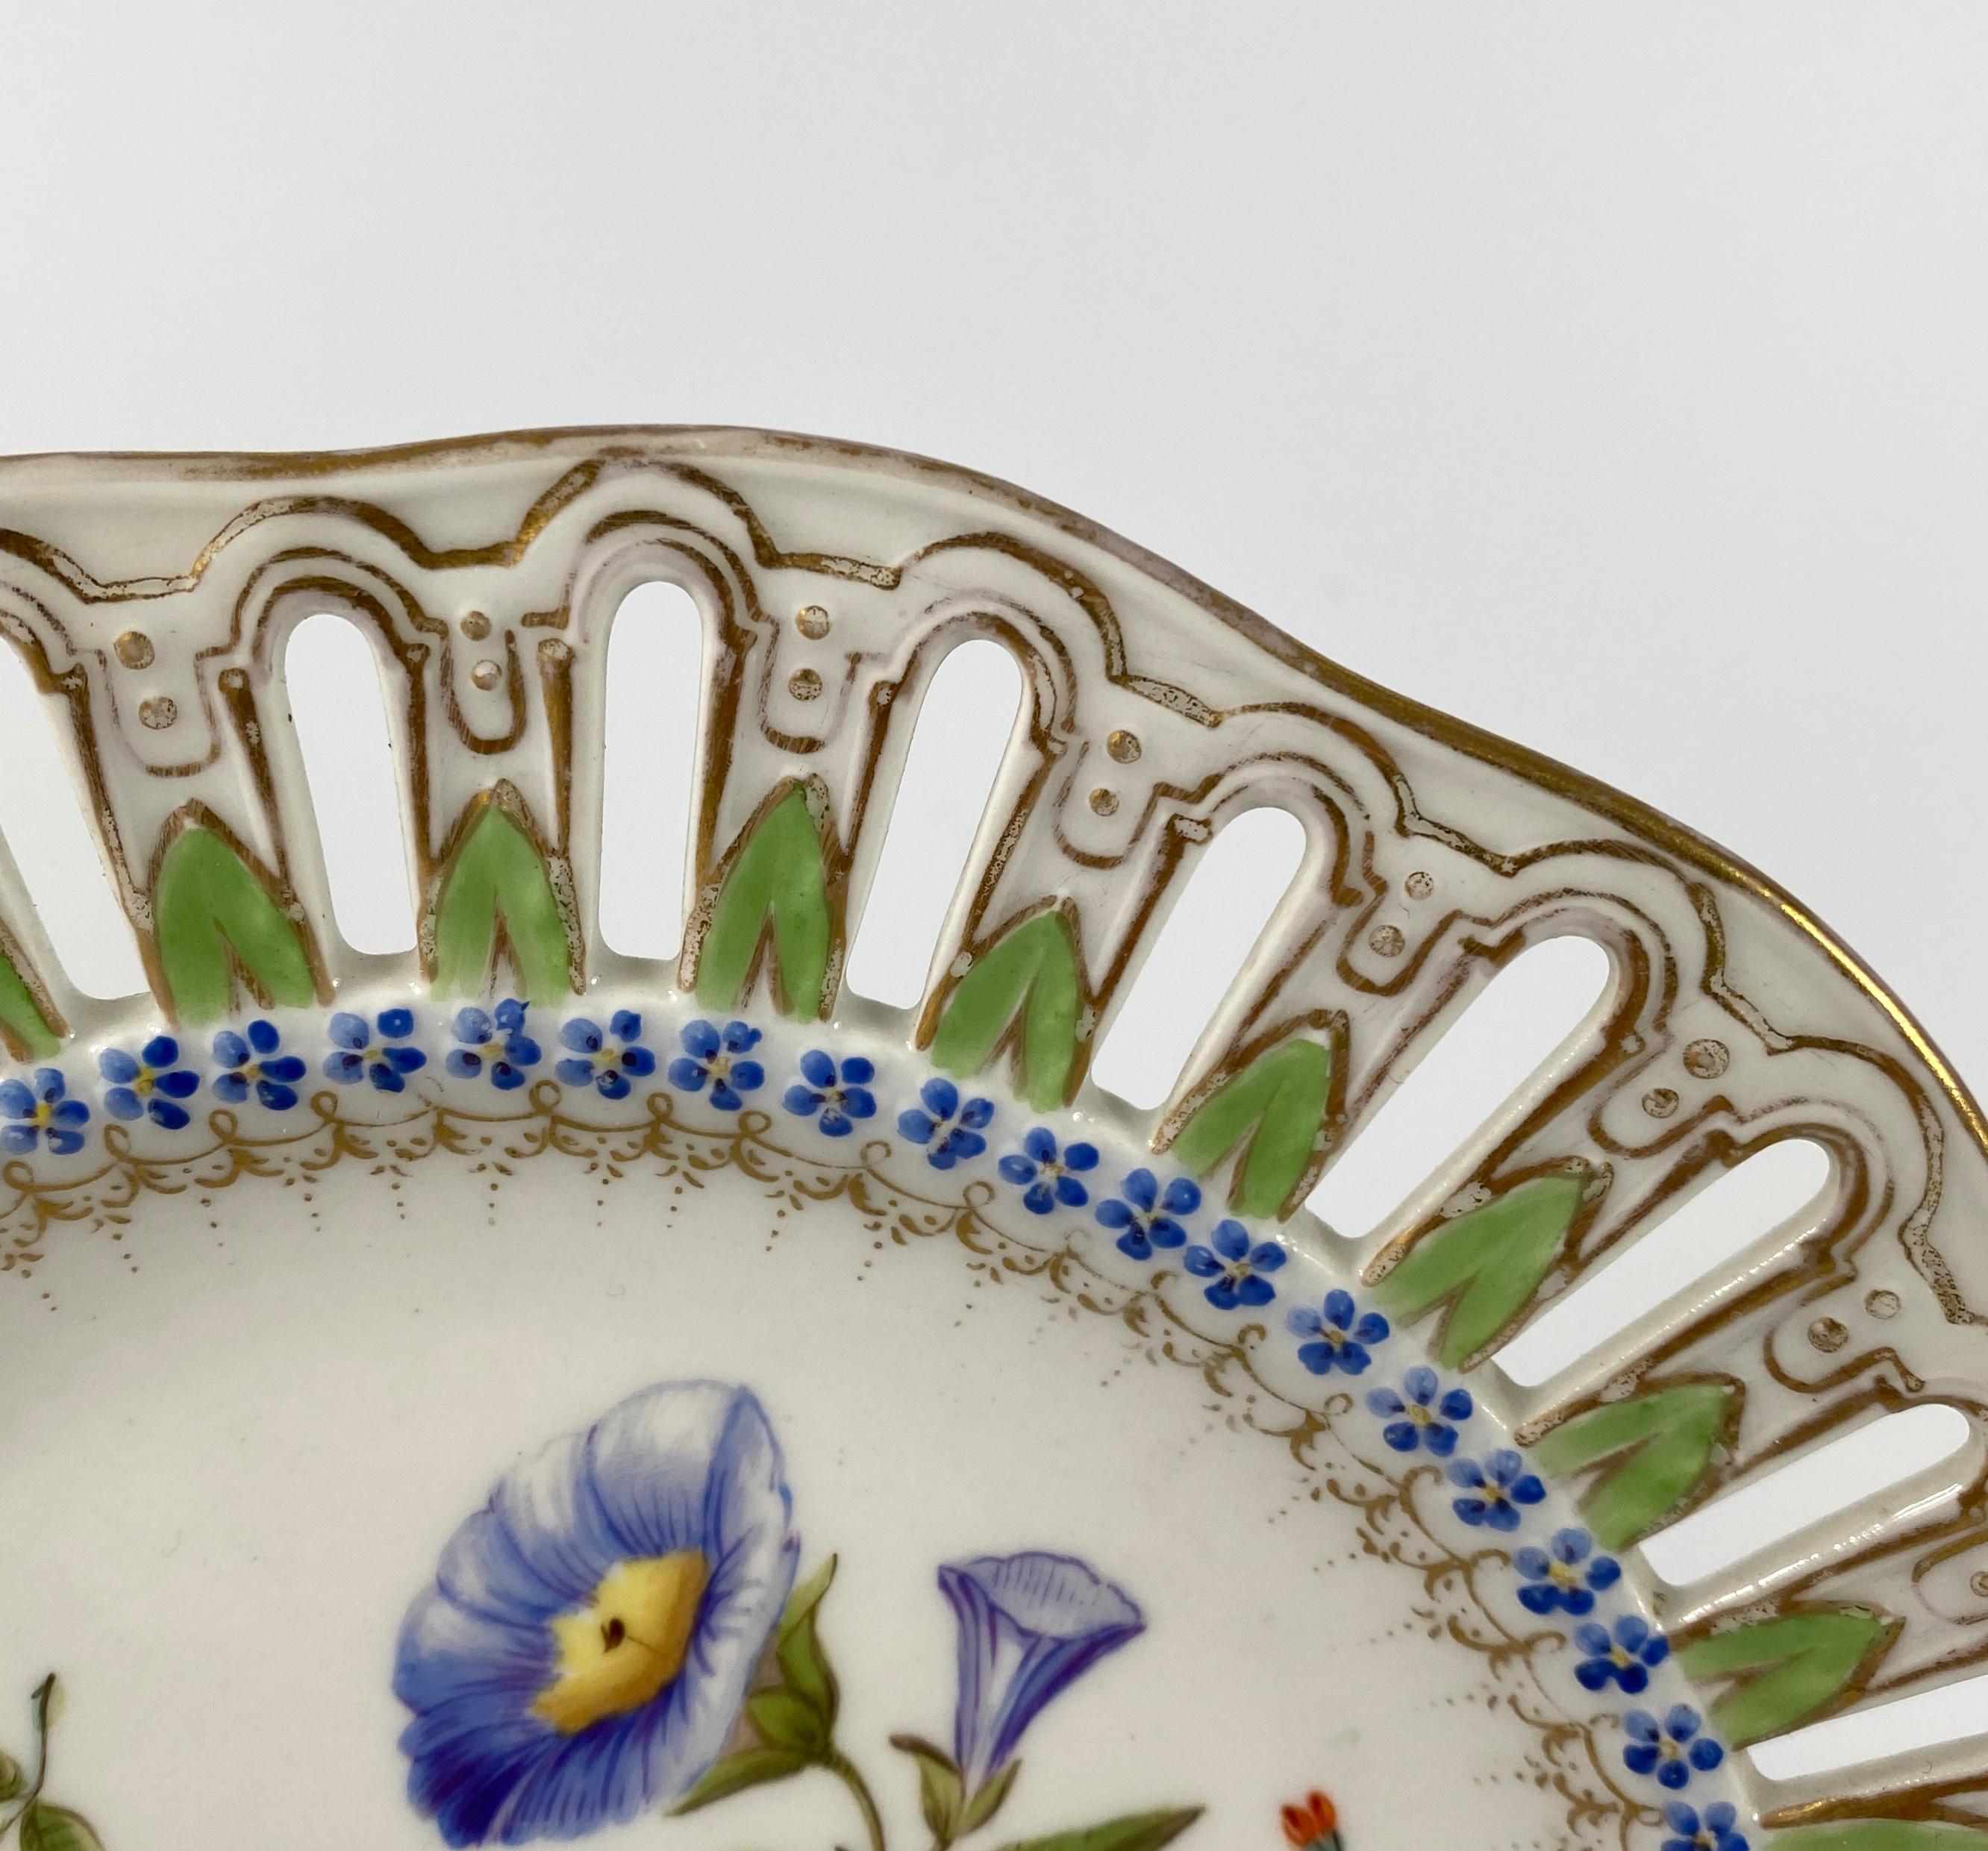 Fired Meissen Porcelain Reticulated Plate, circa 1860